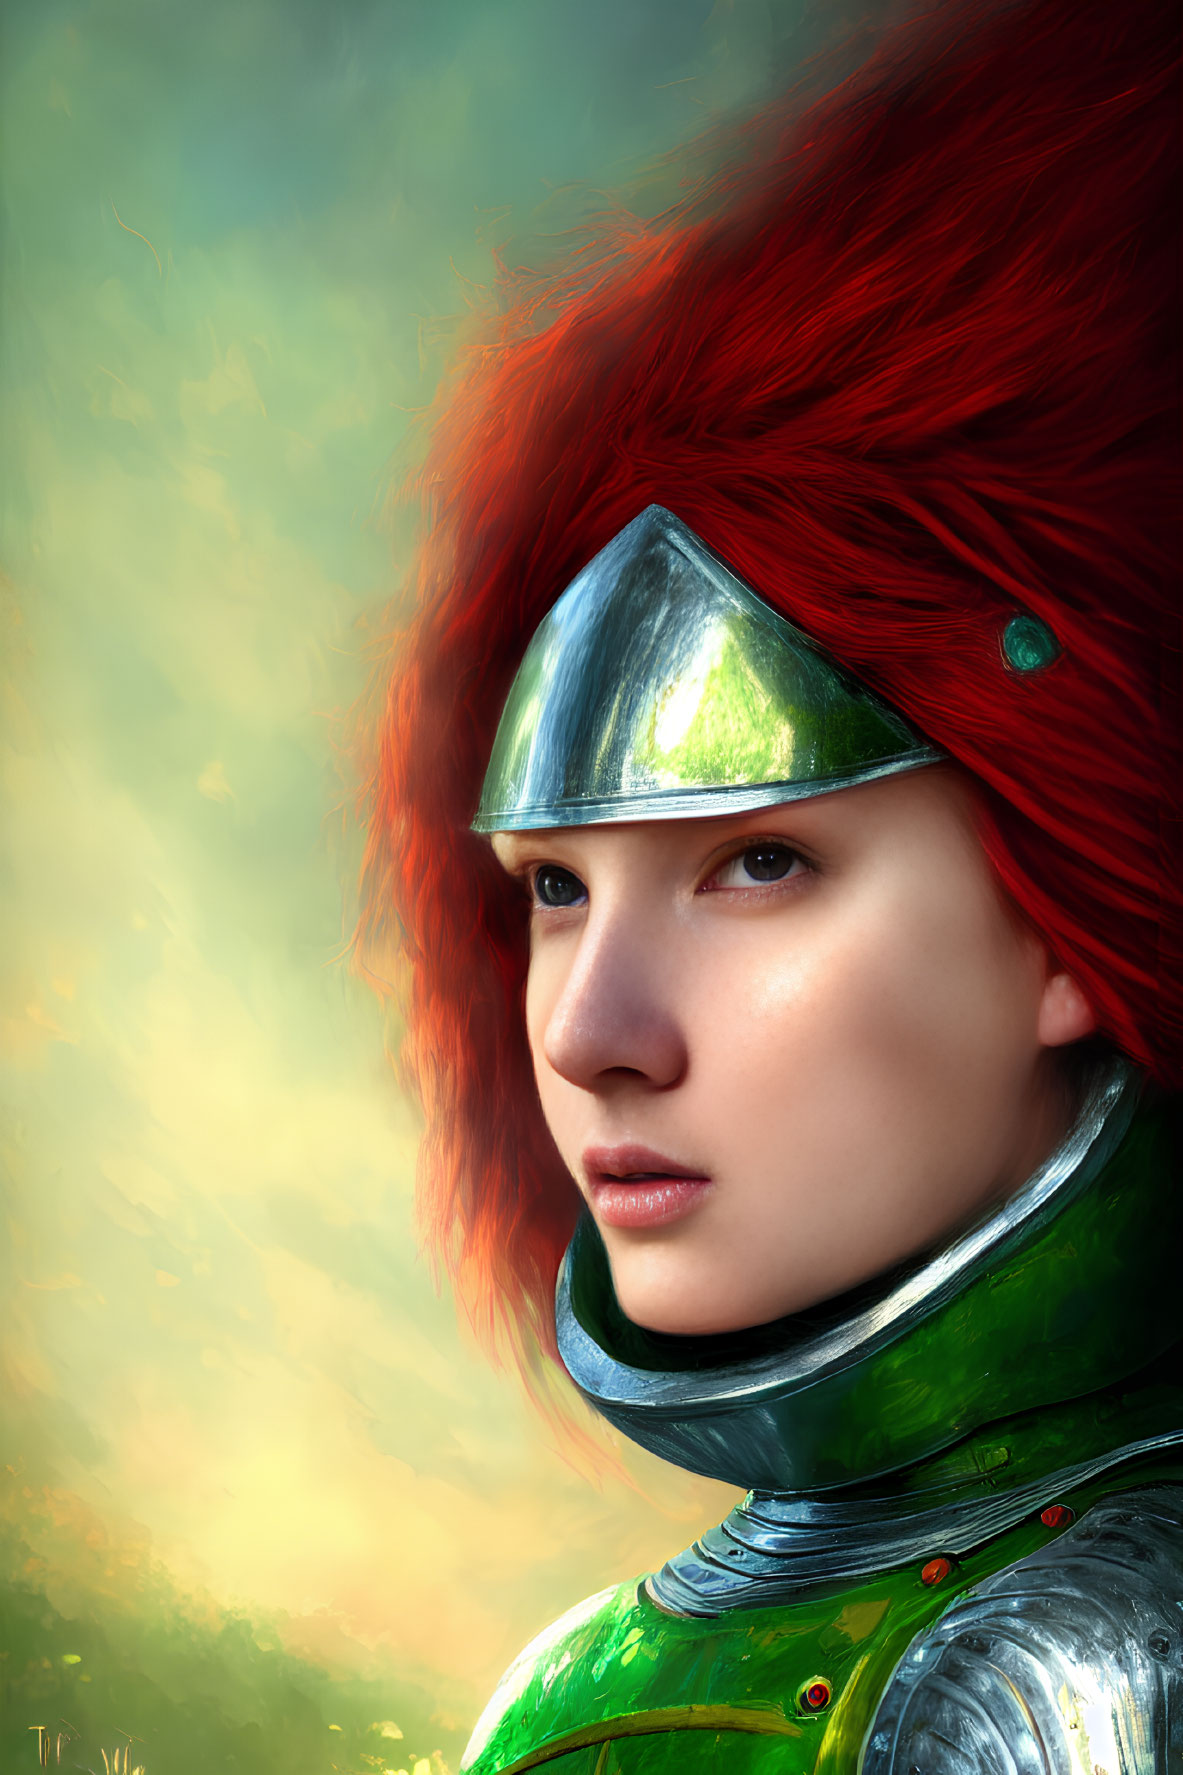 Digital art portrait of person with red hair in silver helmet and green armor on cloudy backdrop